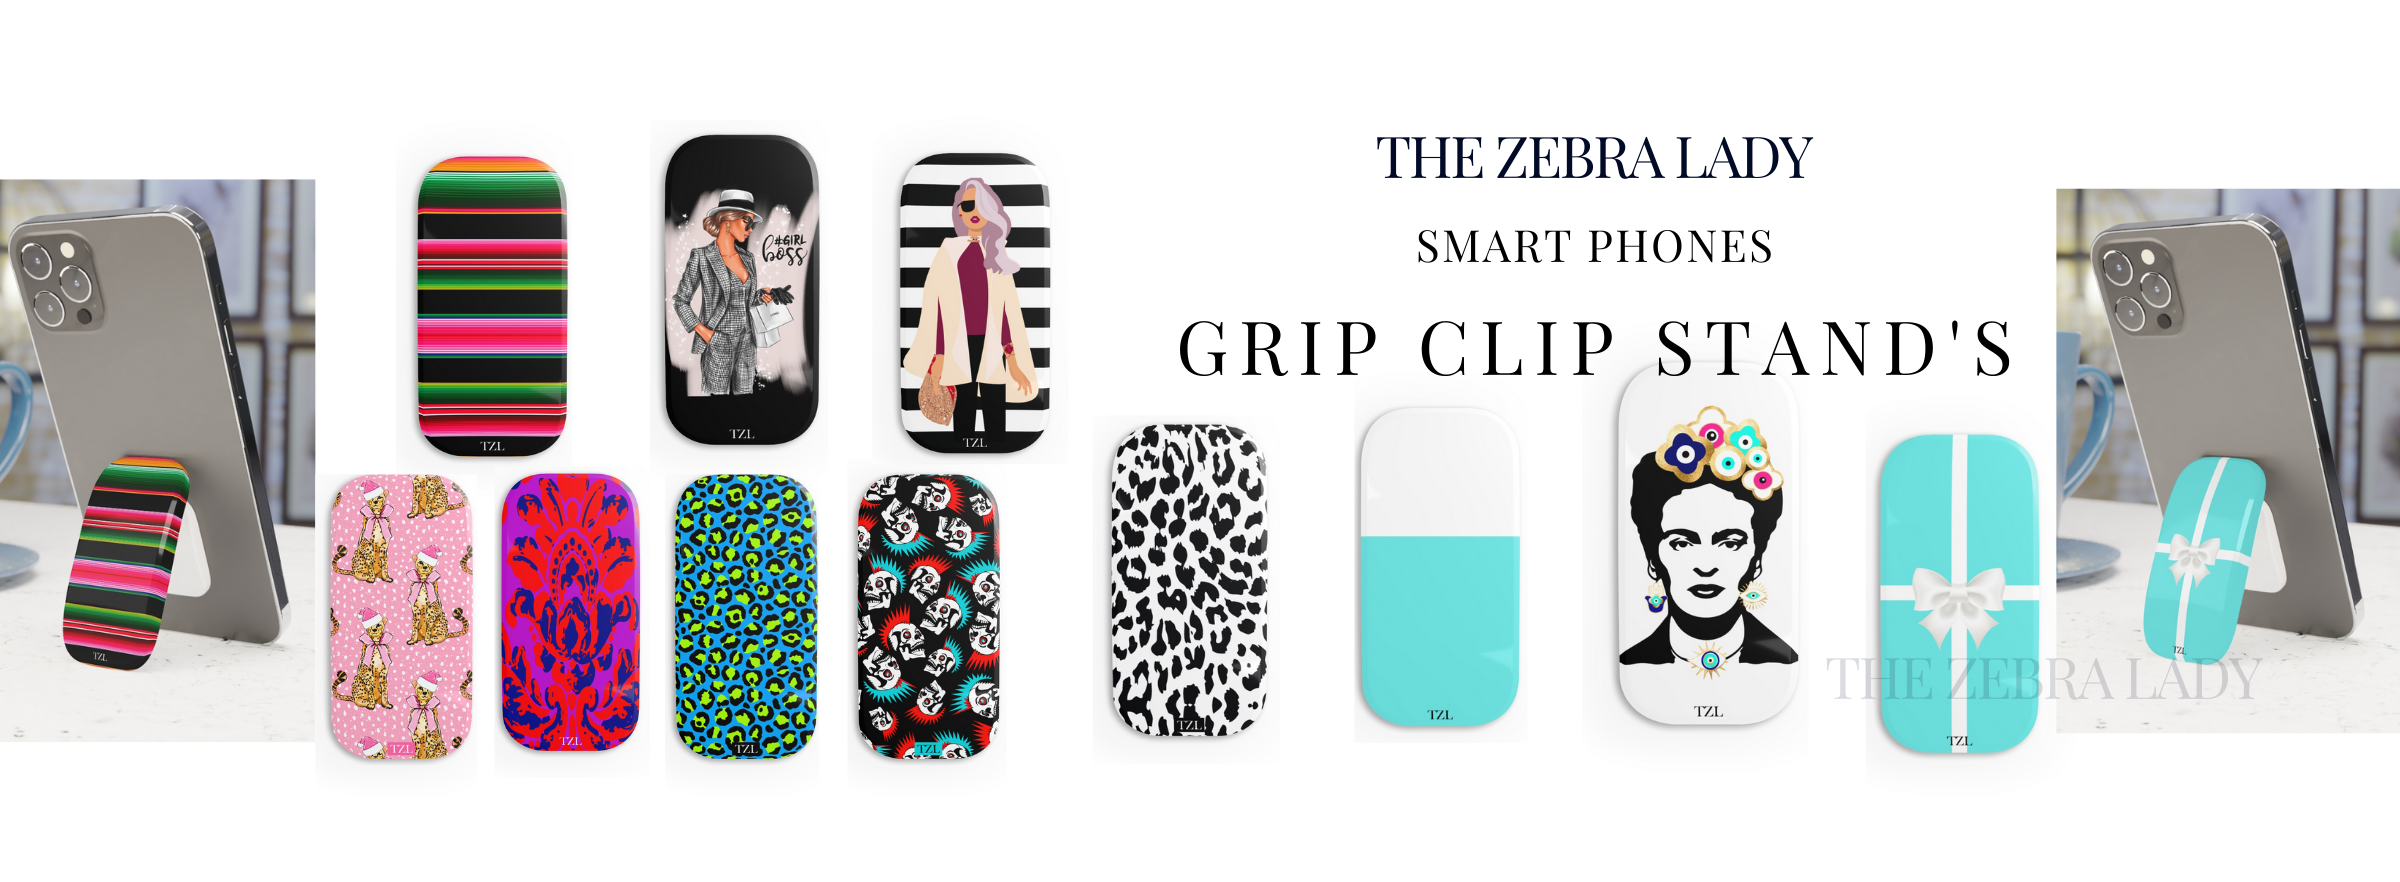 phone grip clip stand banner  The Zebra lady     banner (1).png